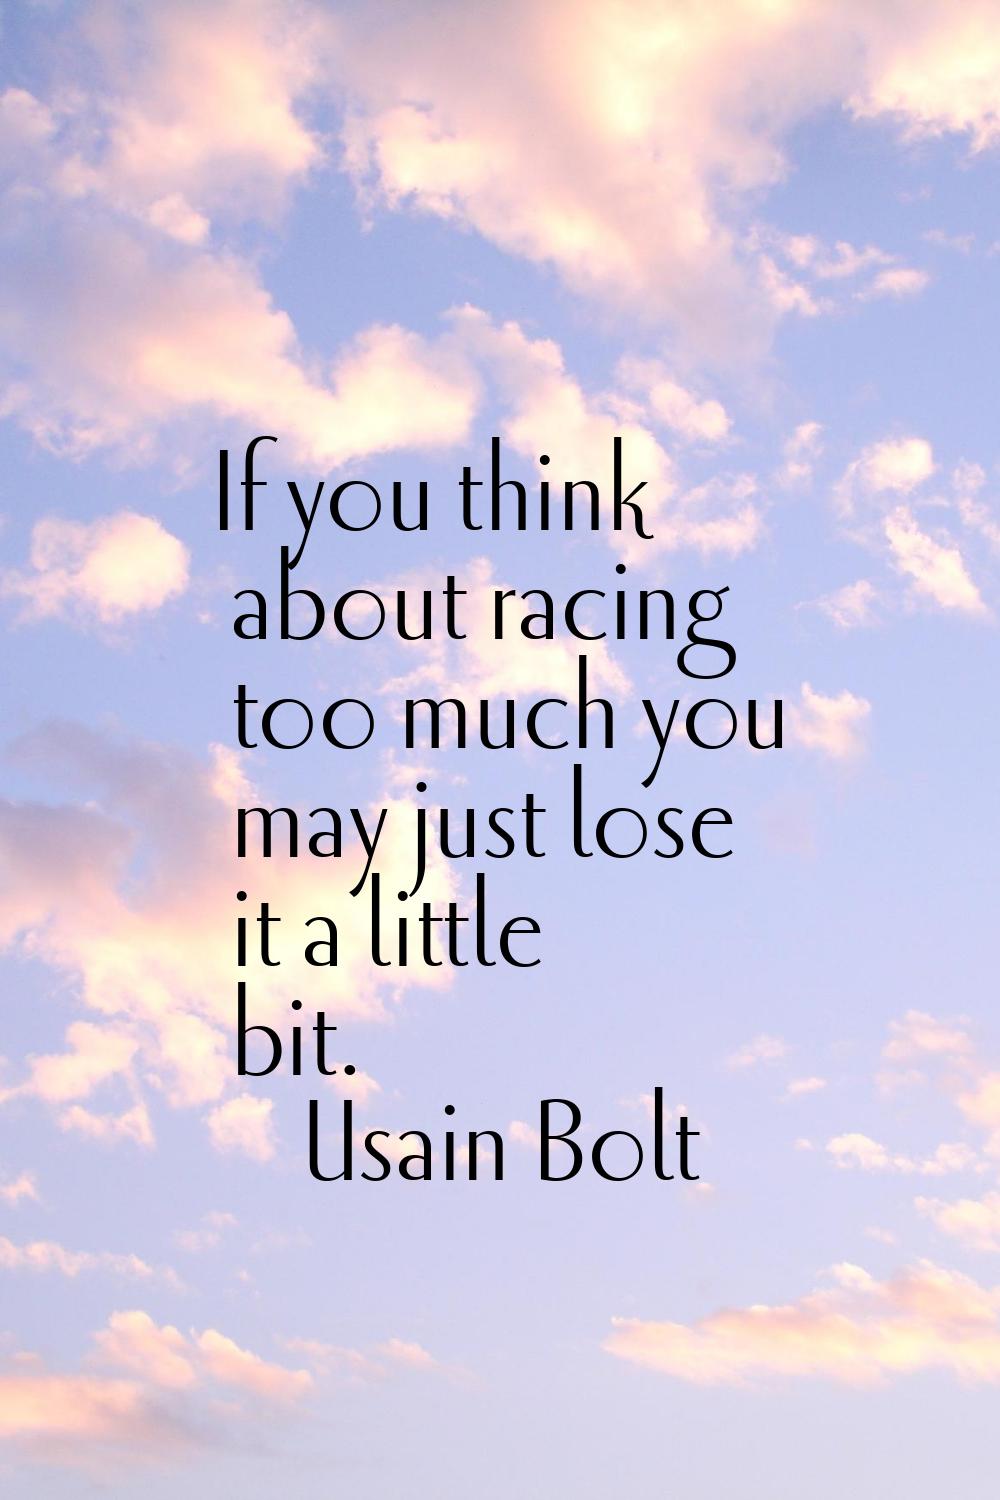 If you think about racing too much you may just lose it a little bit.